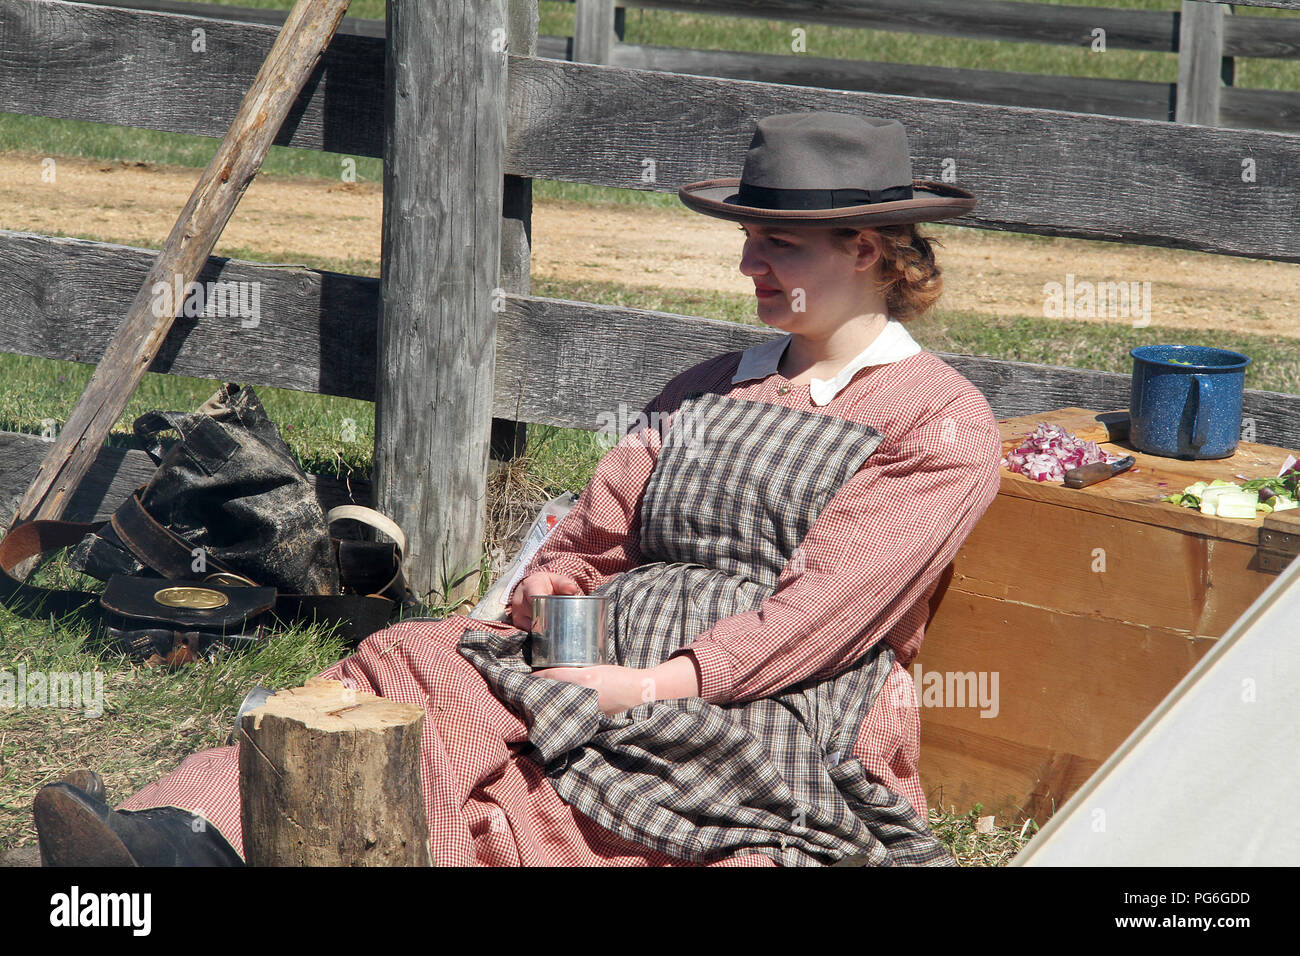 The Confederate Army camping during the American Civil War. Woman drinking from metal mug. Historical reenactment at Appomattox, Virginia. Stock Photo